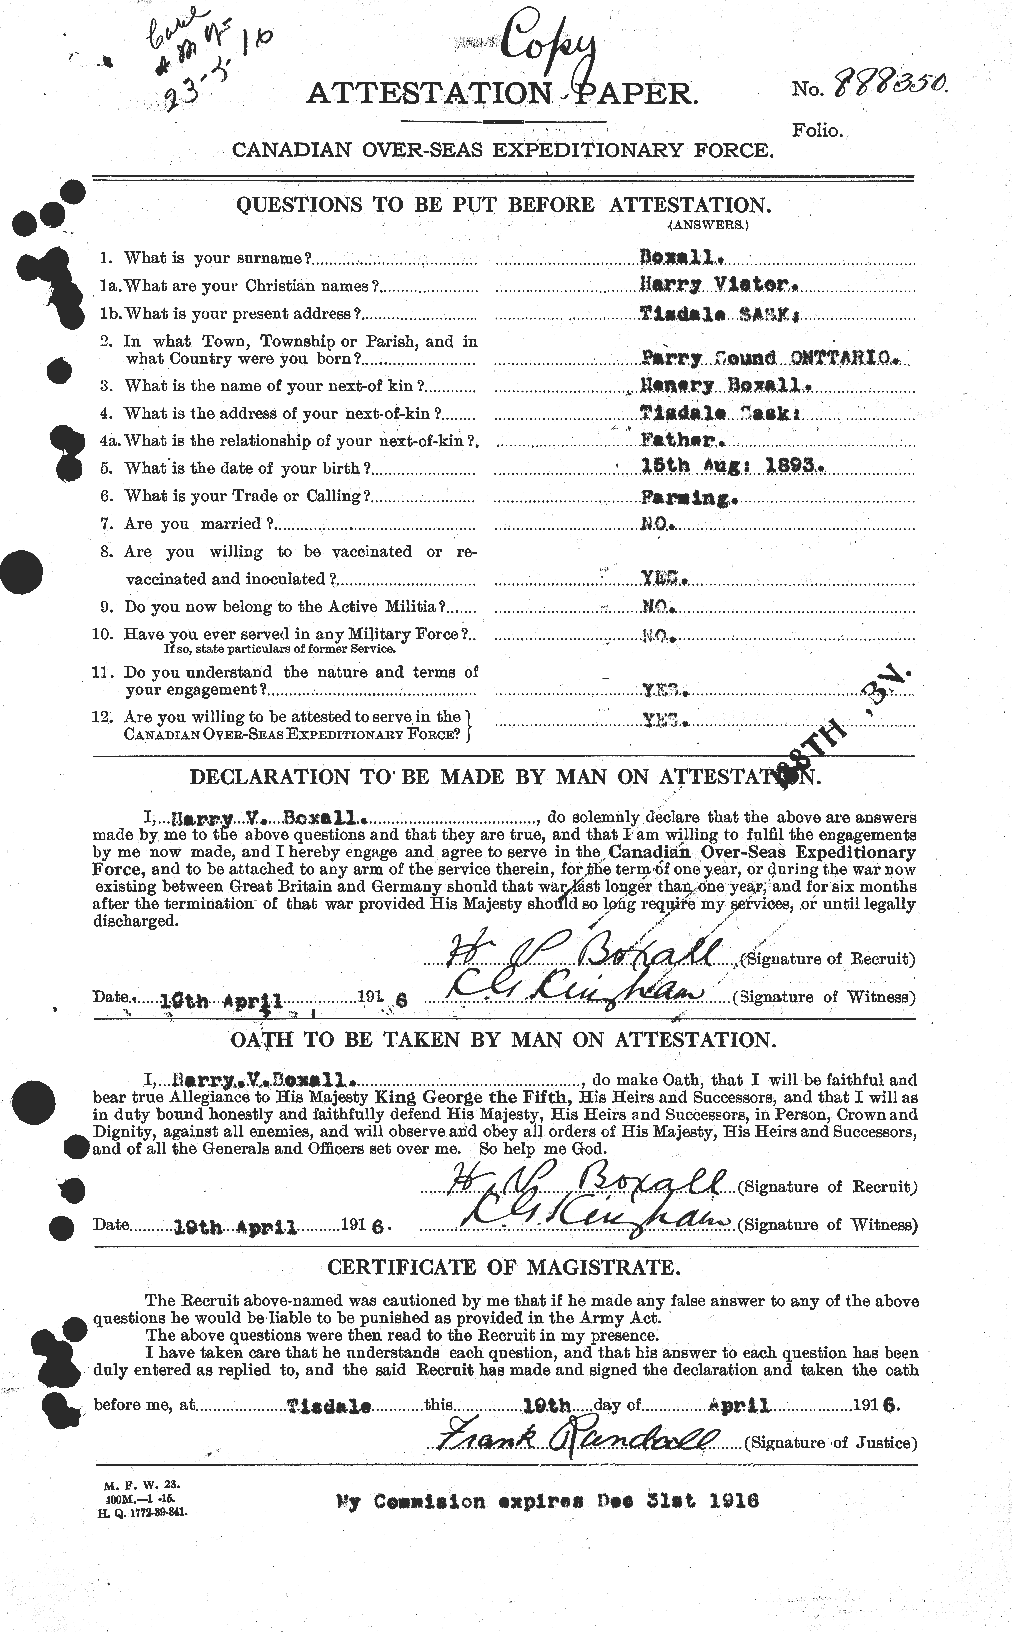 Personnel Records of the First World War - CEF 254477a